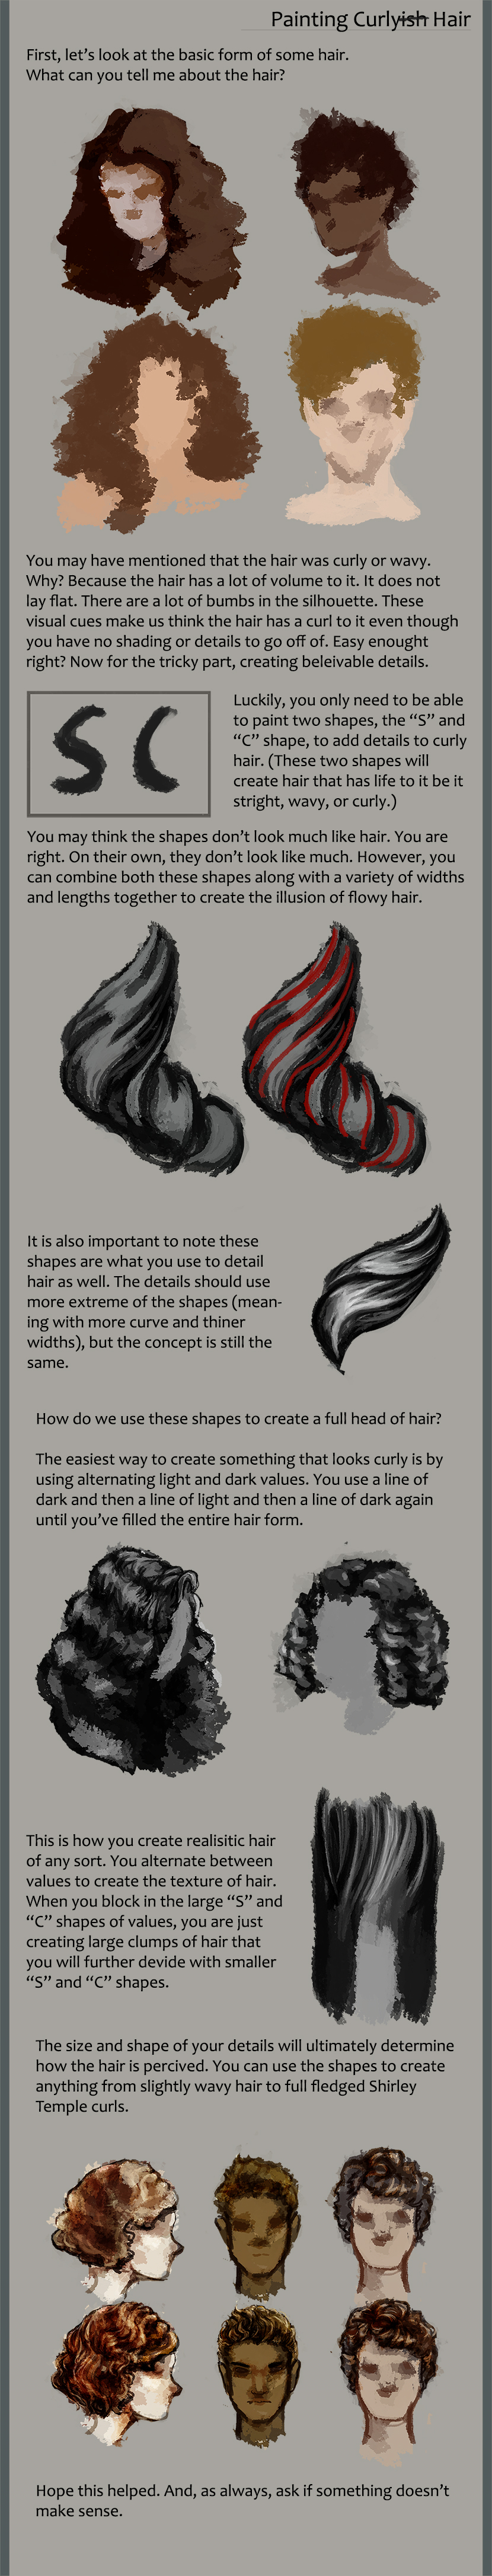 Curly and Wavy Hair Tutorial by Mintsteak